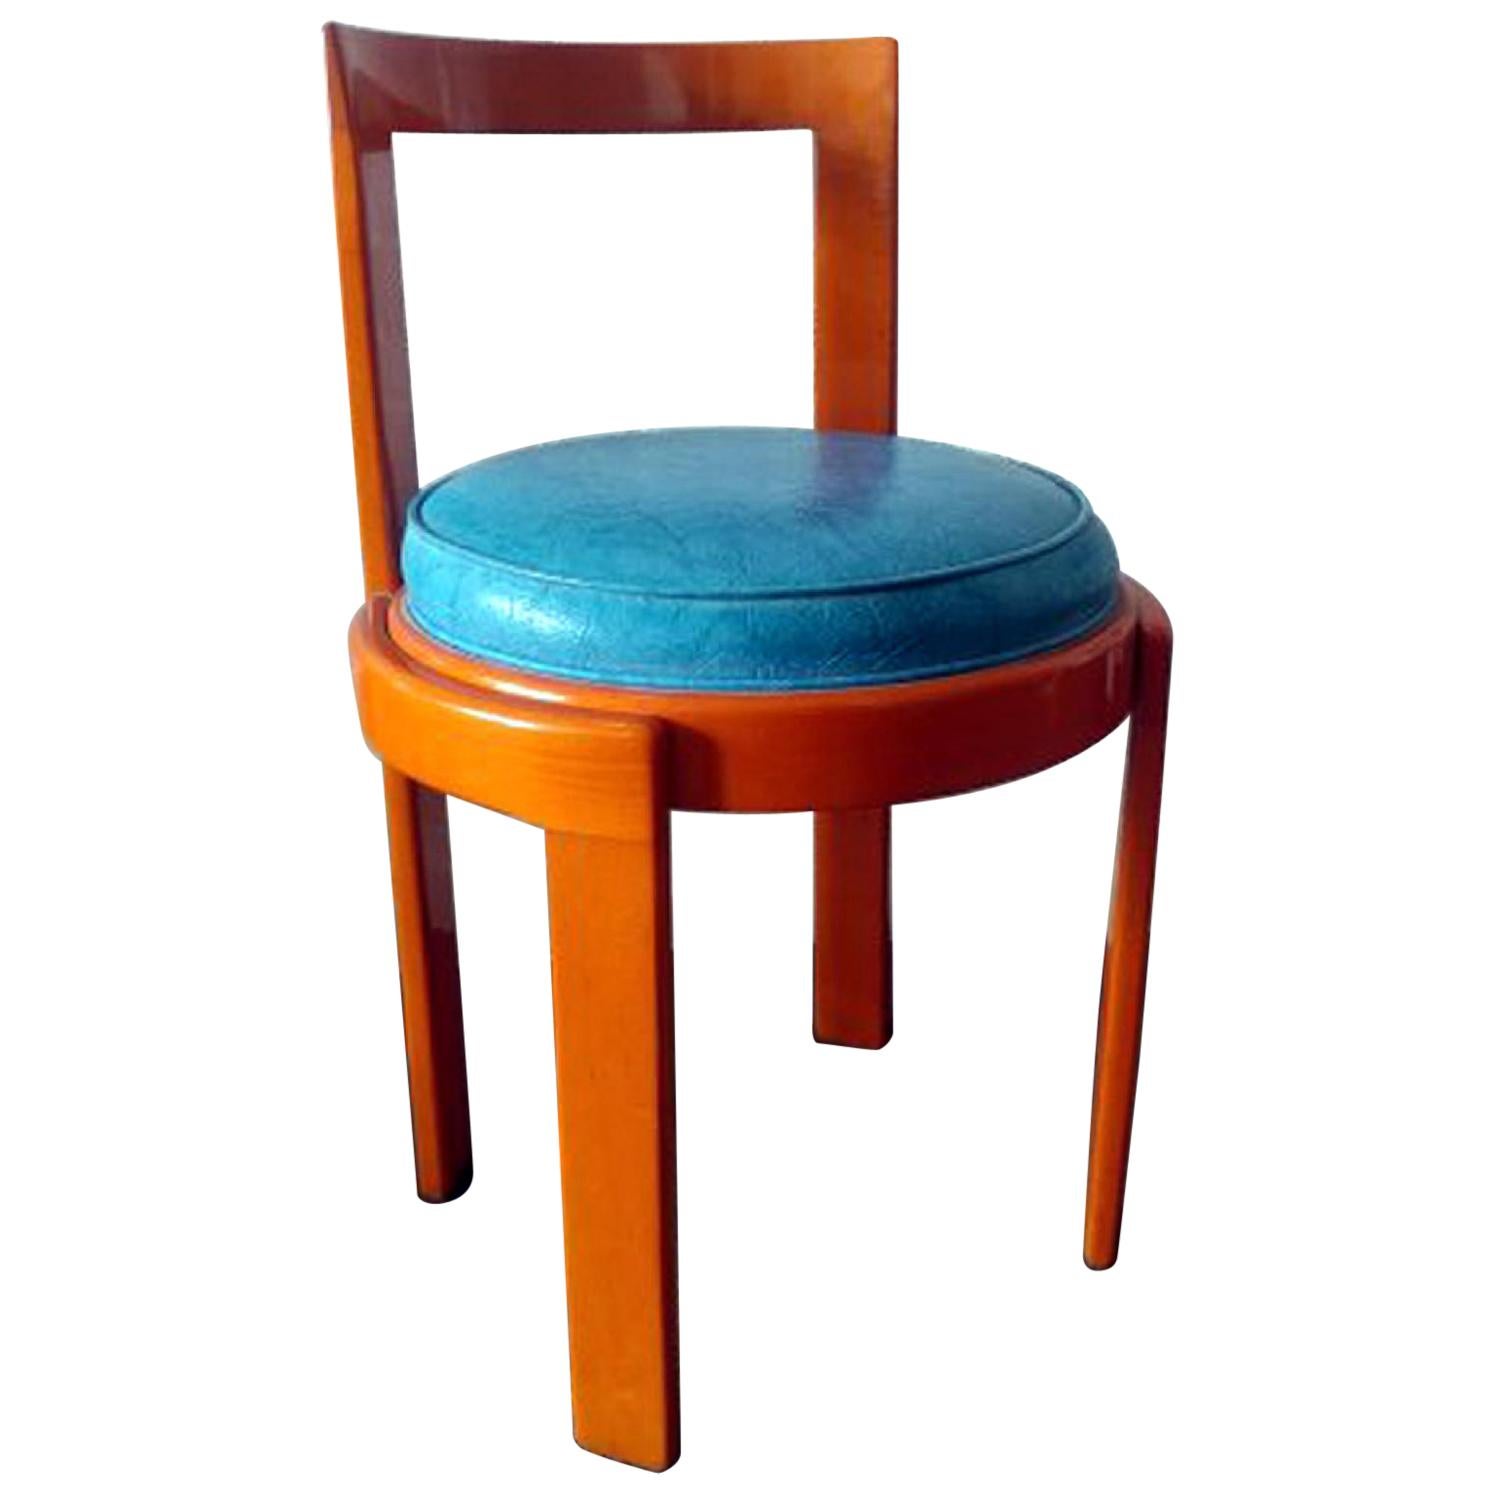 Modern Italian Lacquered Bentwood Chair Offered by La Porte For Sale